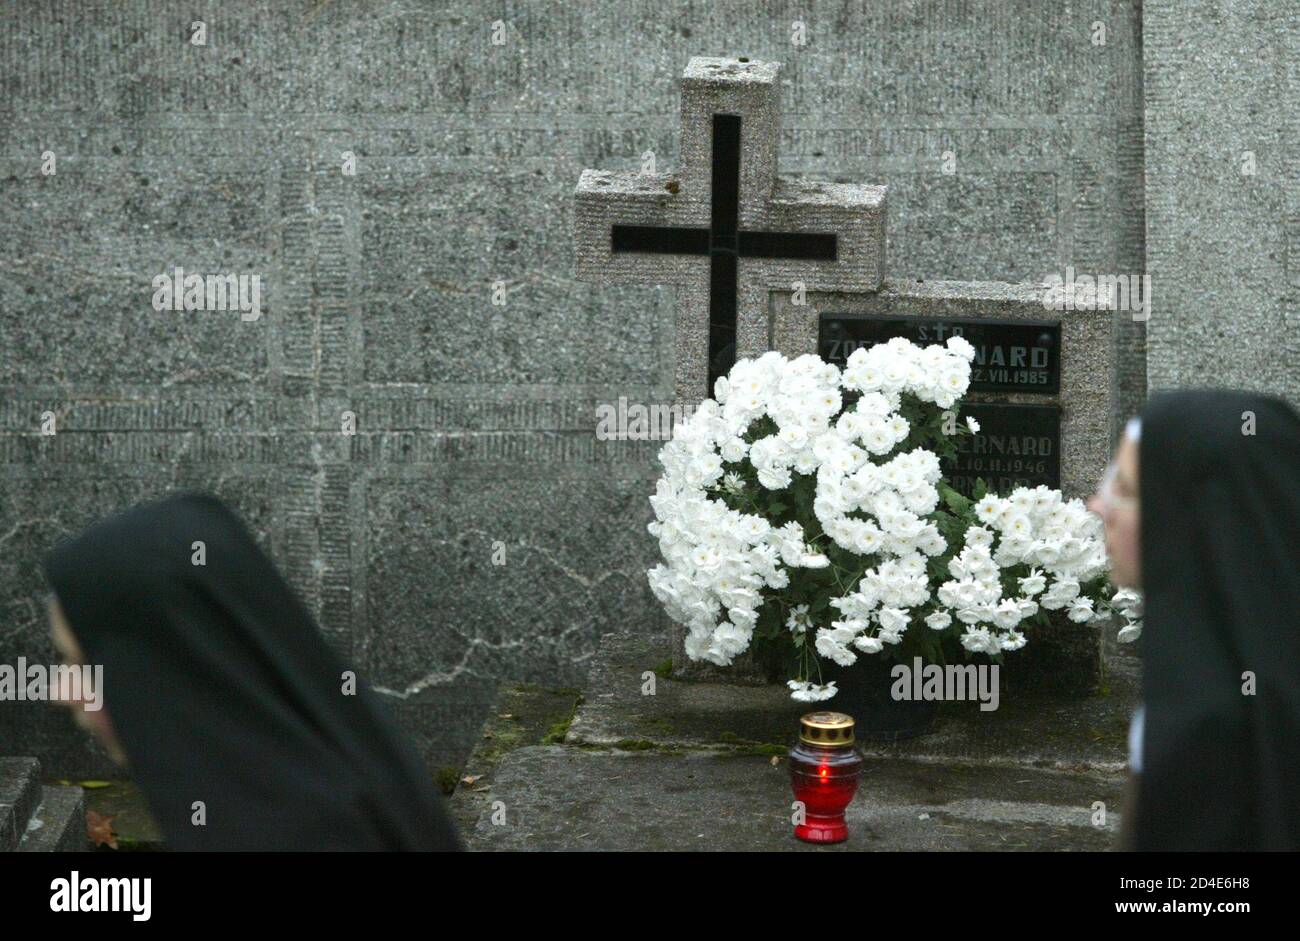 Two Polish nuns pass a grave at the Krzyz cemetery on All Saints Day in Tarnow, southern Poland November 1, 2004. Thousands of people gathered at cemeteries to celebrate the religious holiday. REUTERS/Katarina Stoltz  KS/WS Stock Photo